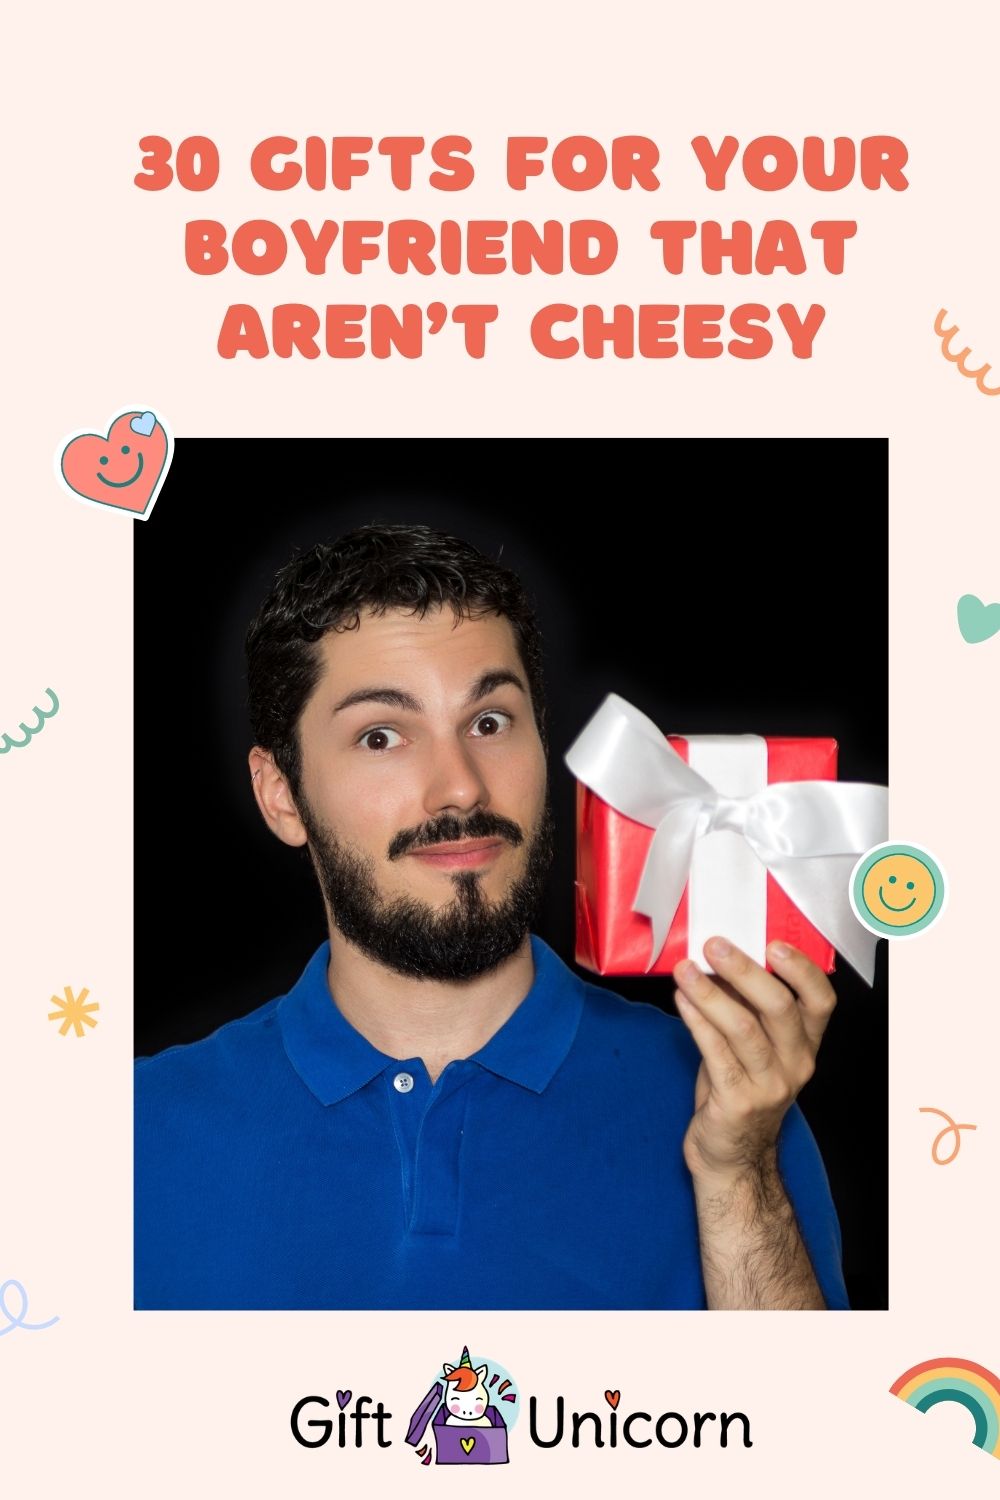 30 gifts for your boyfriend that are not cheesy